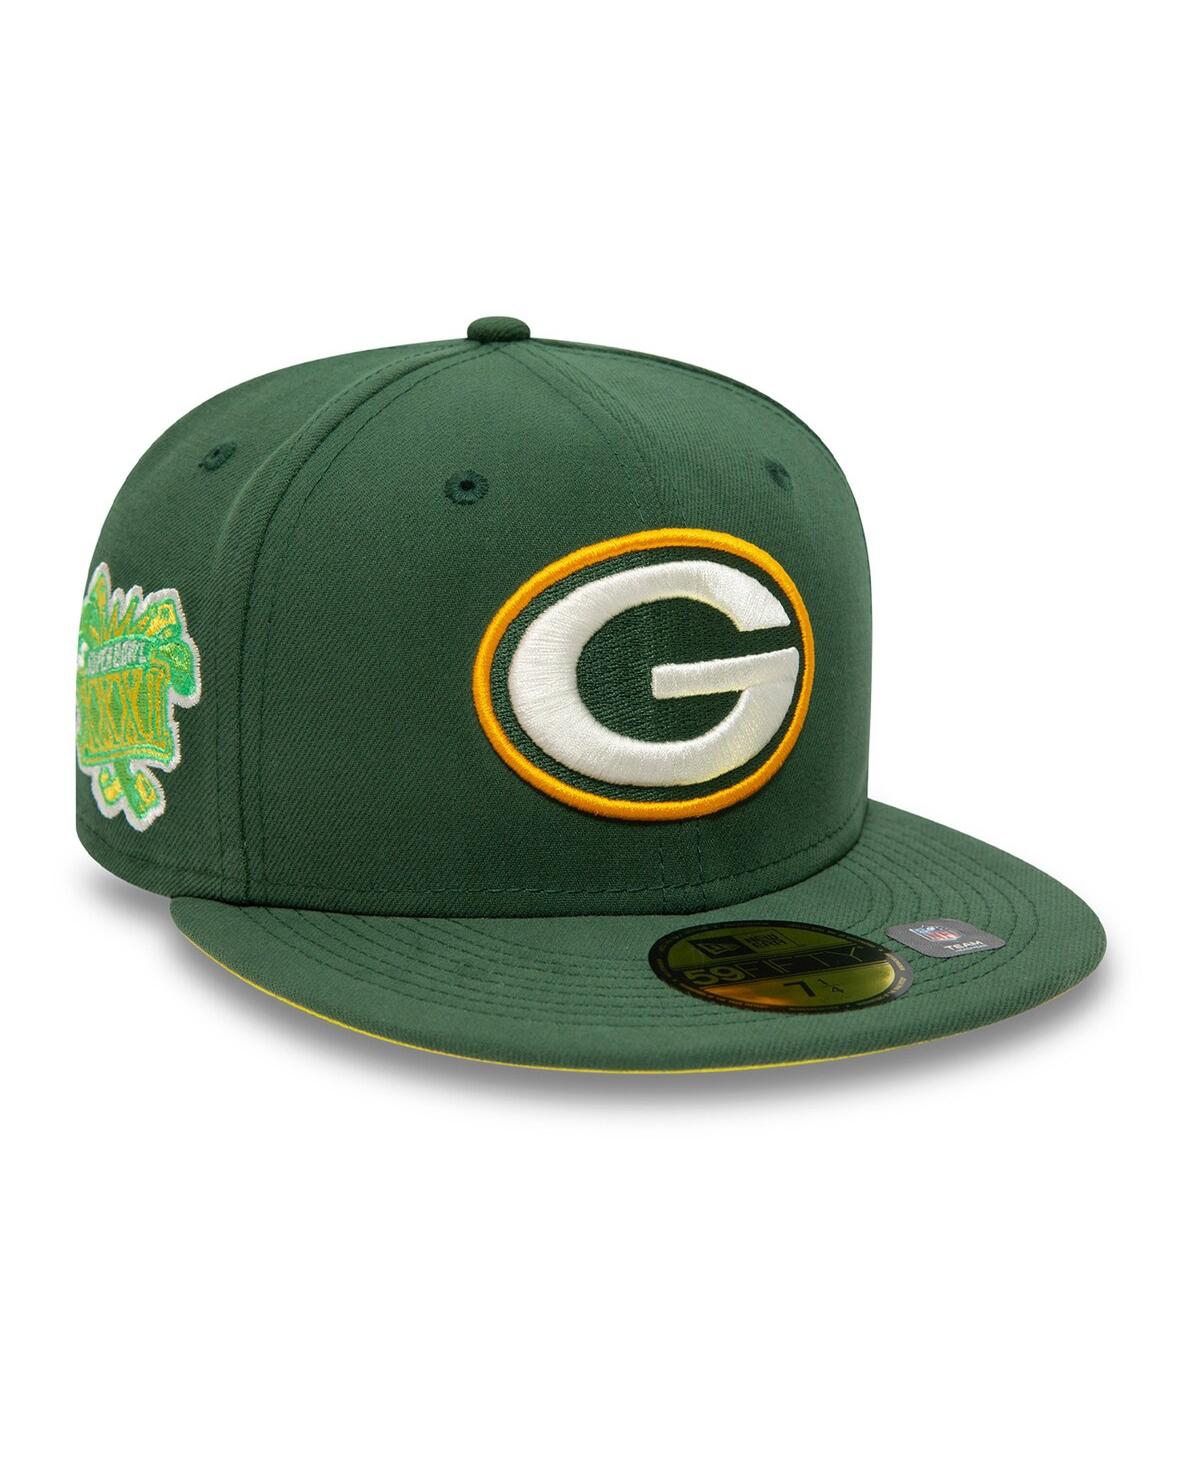 New Era Men's  Green Green Bay Packers Super Bowl Xxxi Citrus Pop 59fifty Fitted Hat